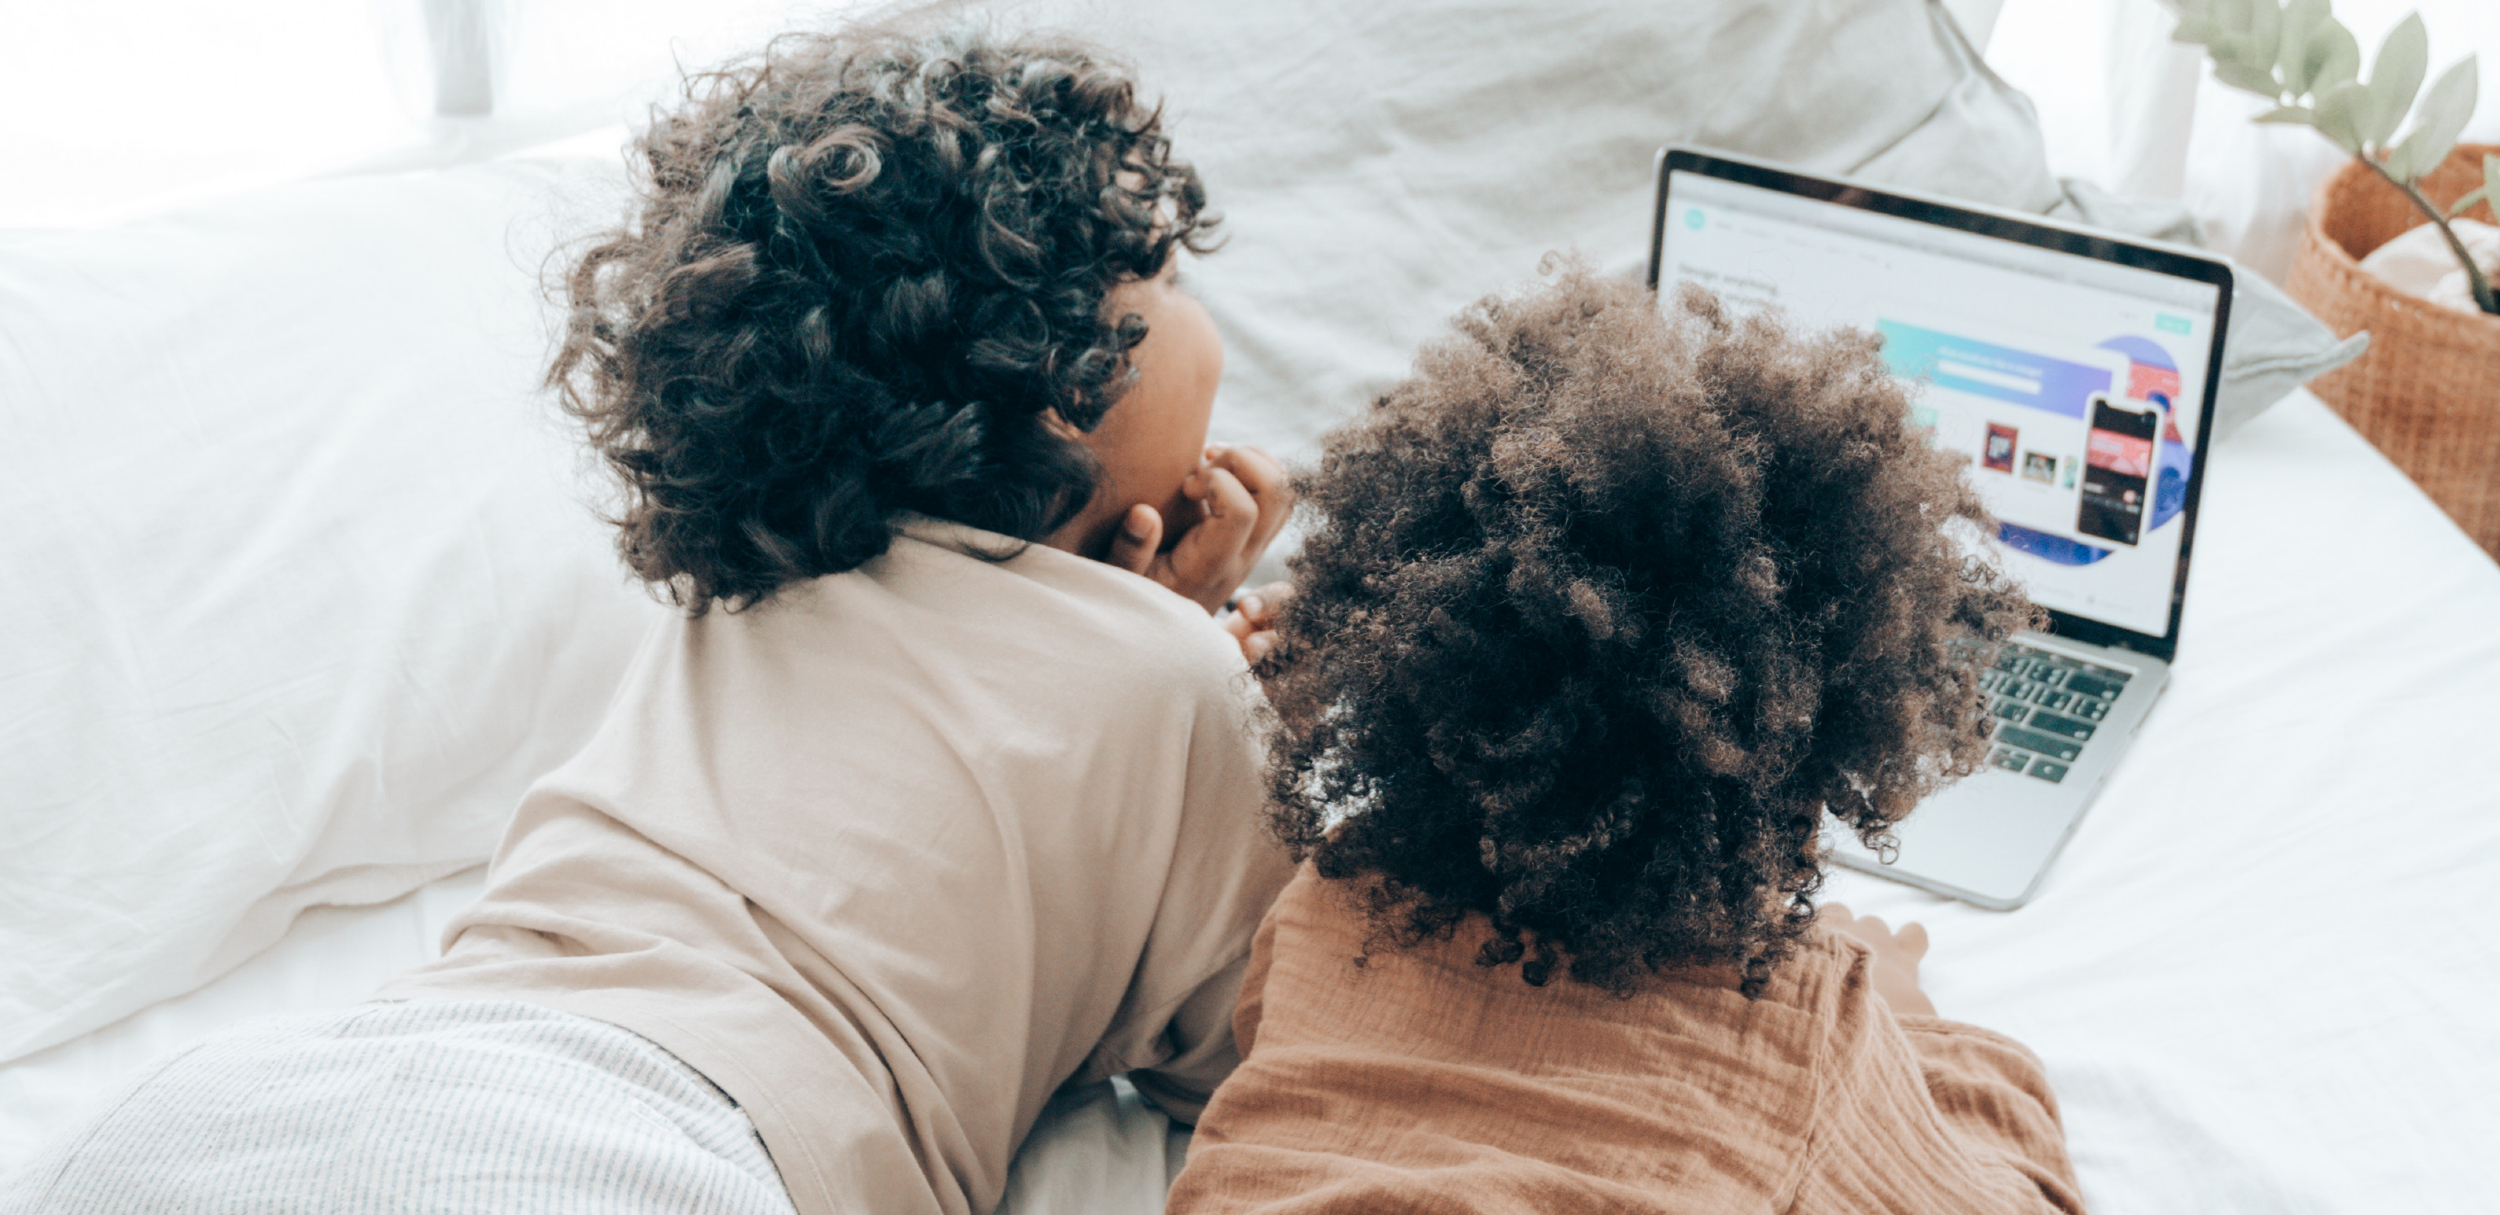 Parenting for a Digital Future July 2020 roundup